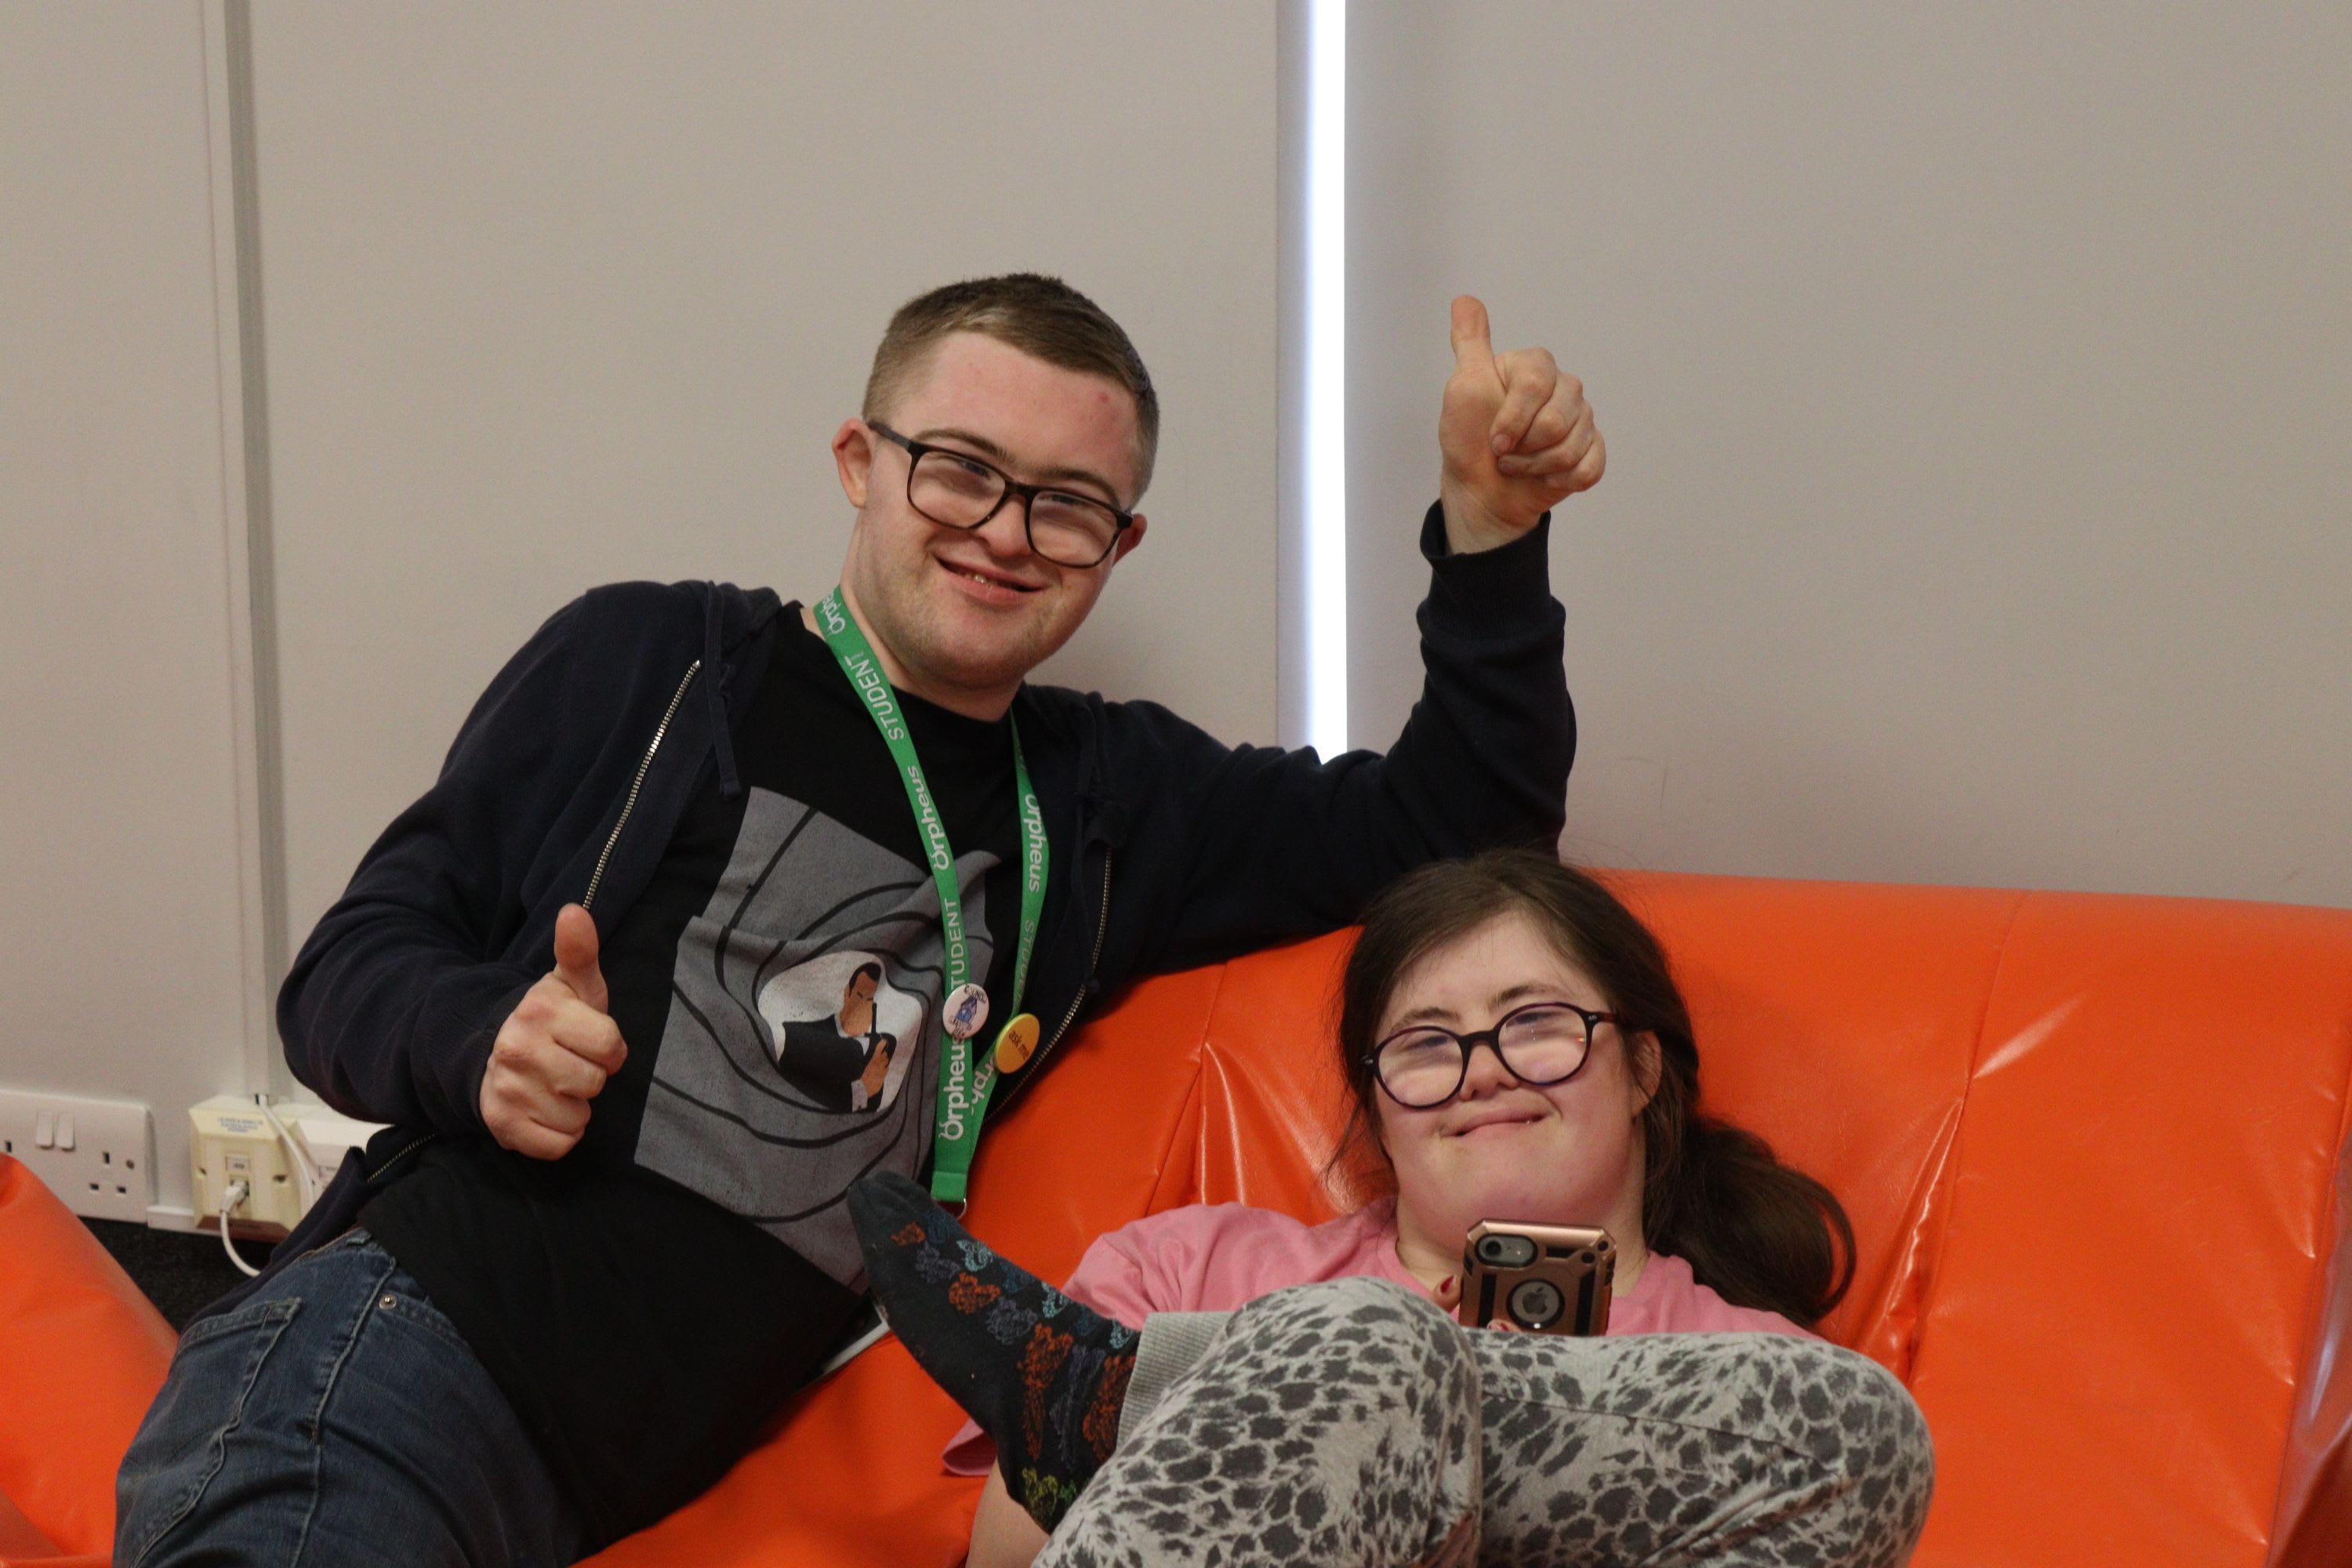 Two students sat on a low orange chair in the sensory room at the Orpheus centre, in Godstone, Surrey. They are both smiling and one of the students is giving the thumbs up sign.